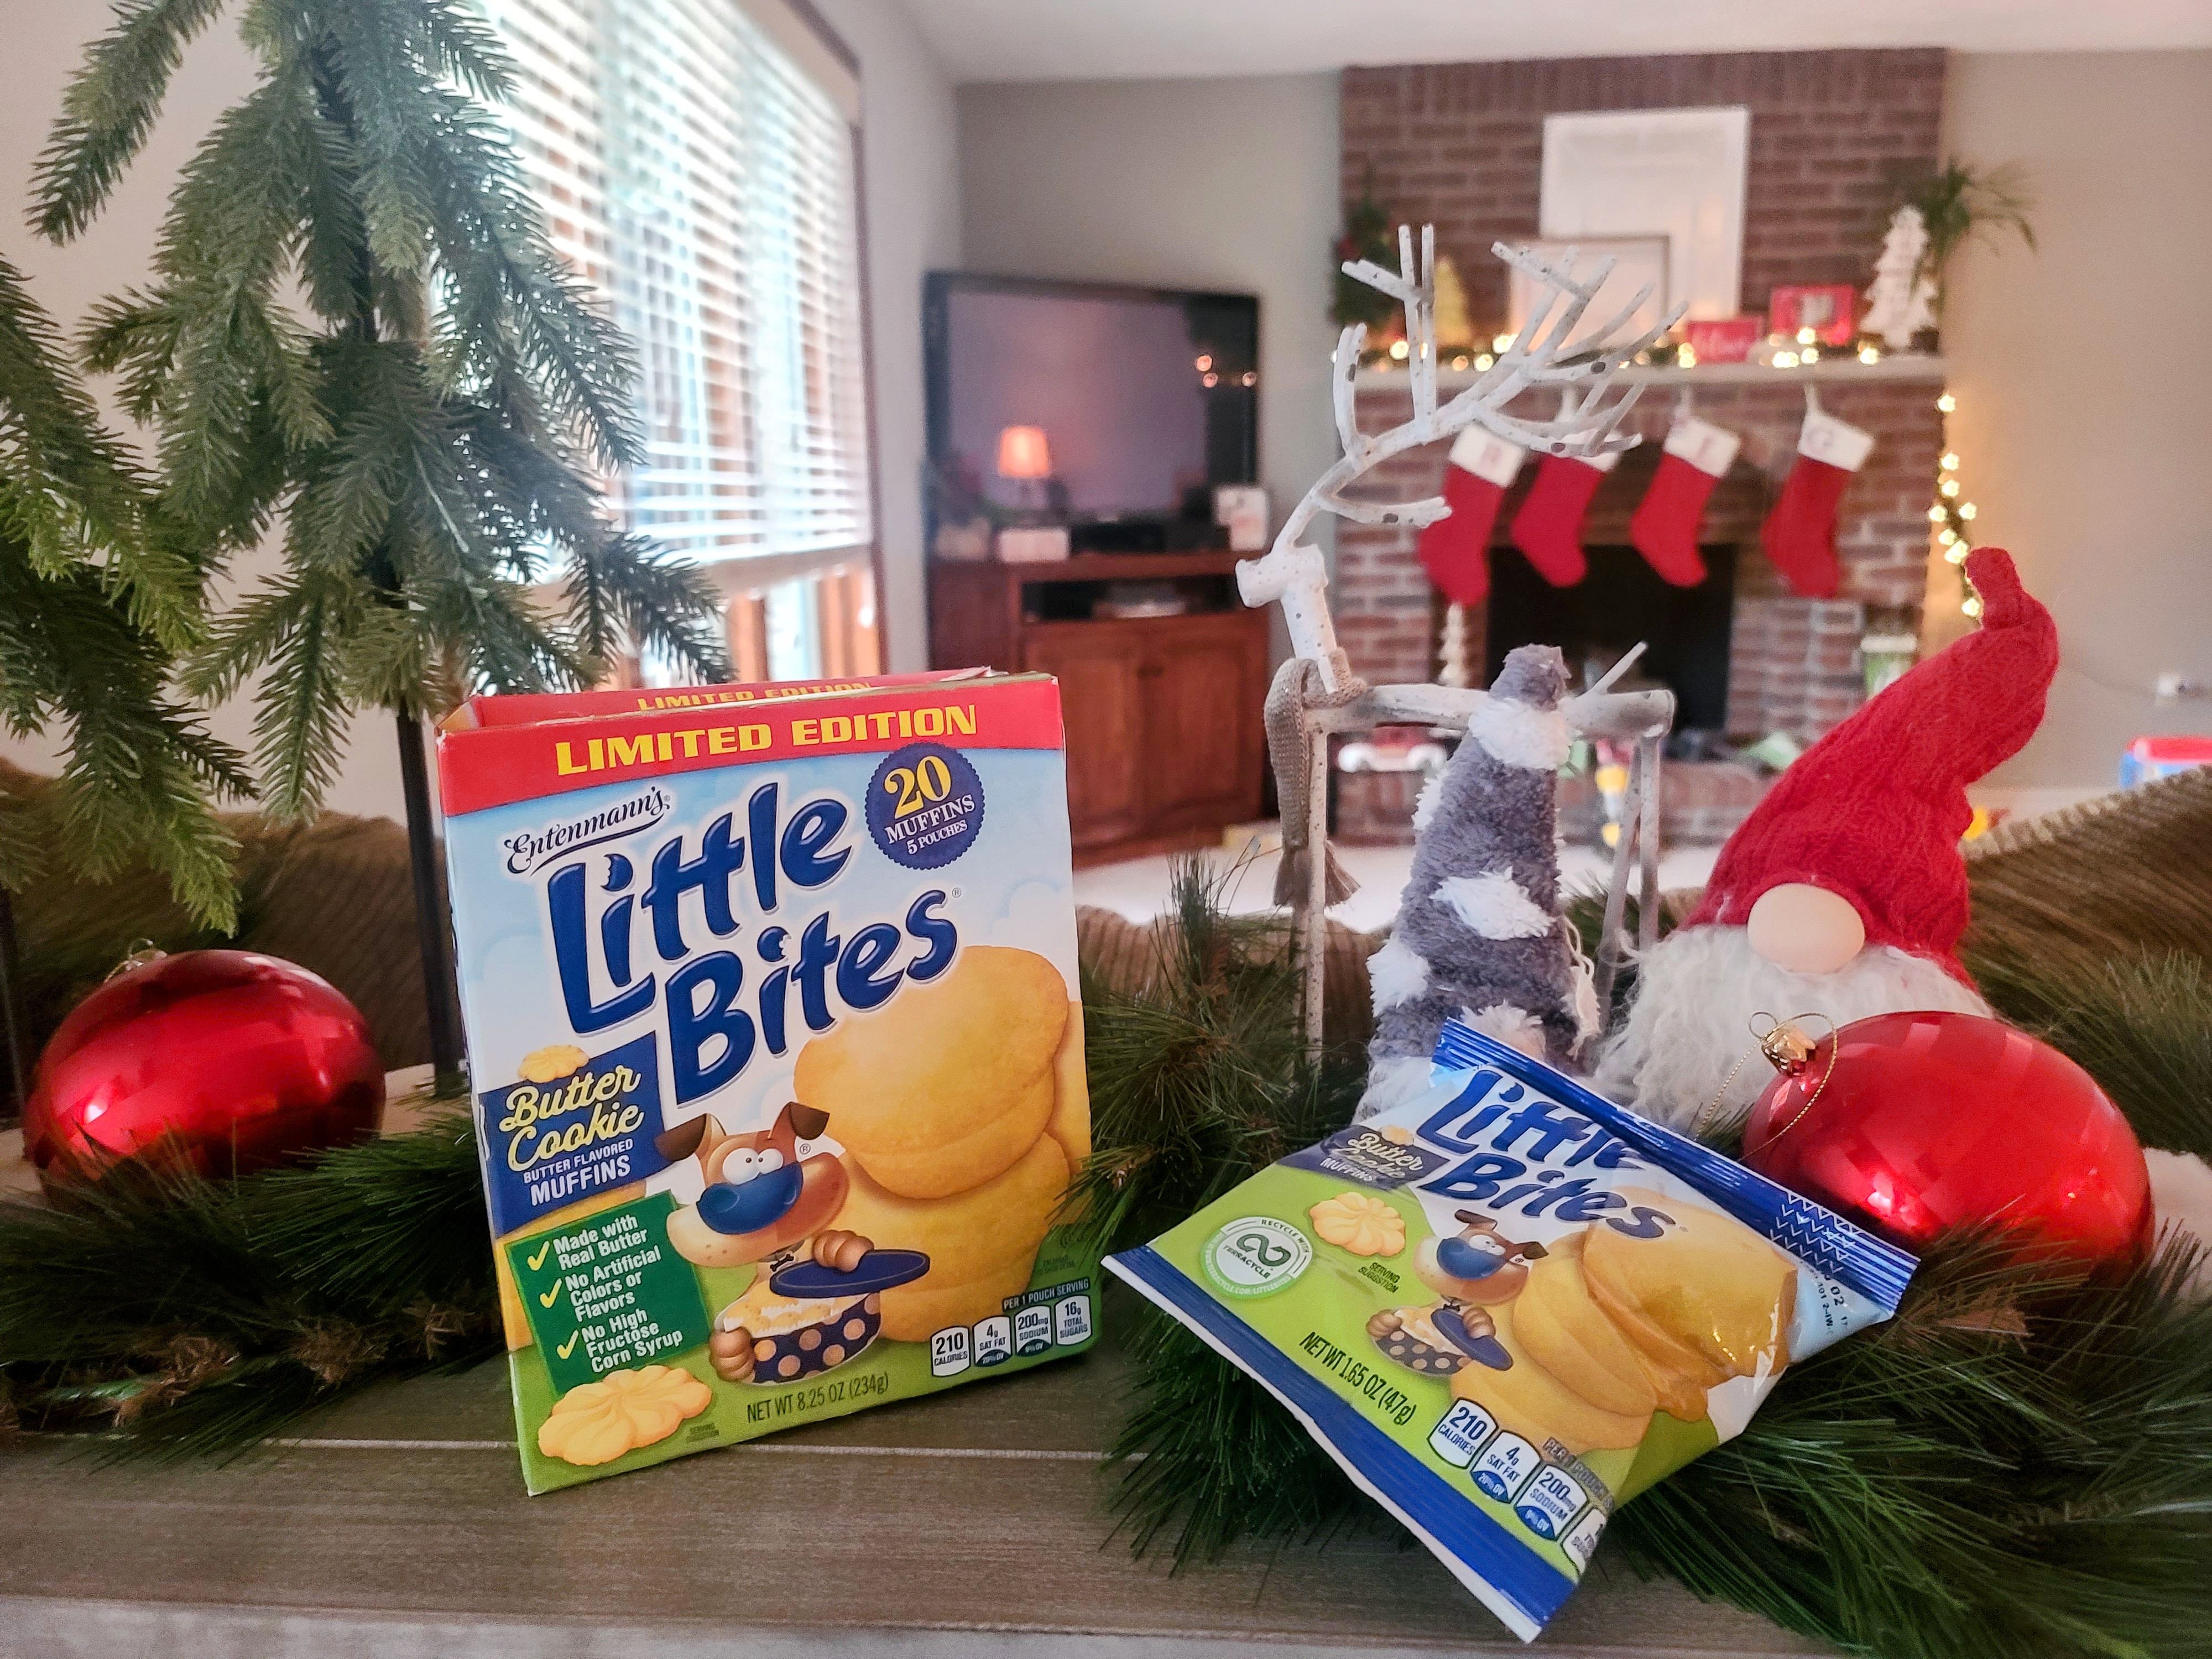 Little Bites: a sweet, simple and memorable holiday tradition